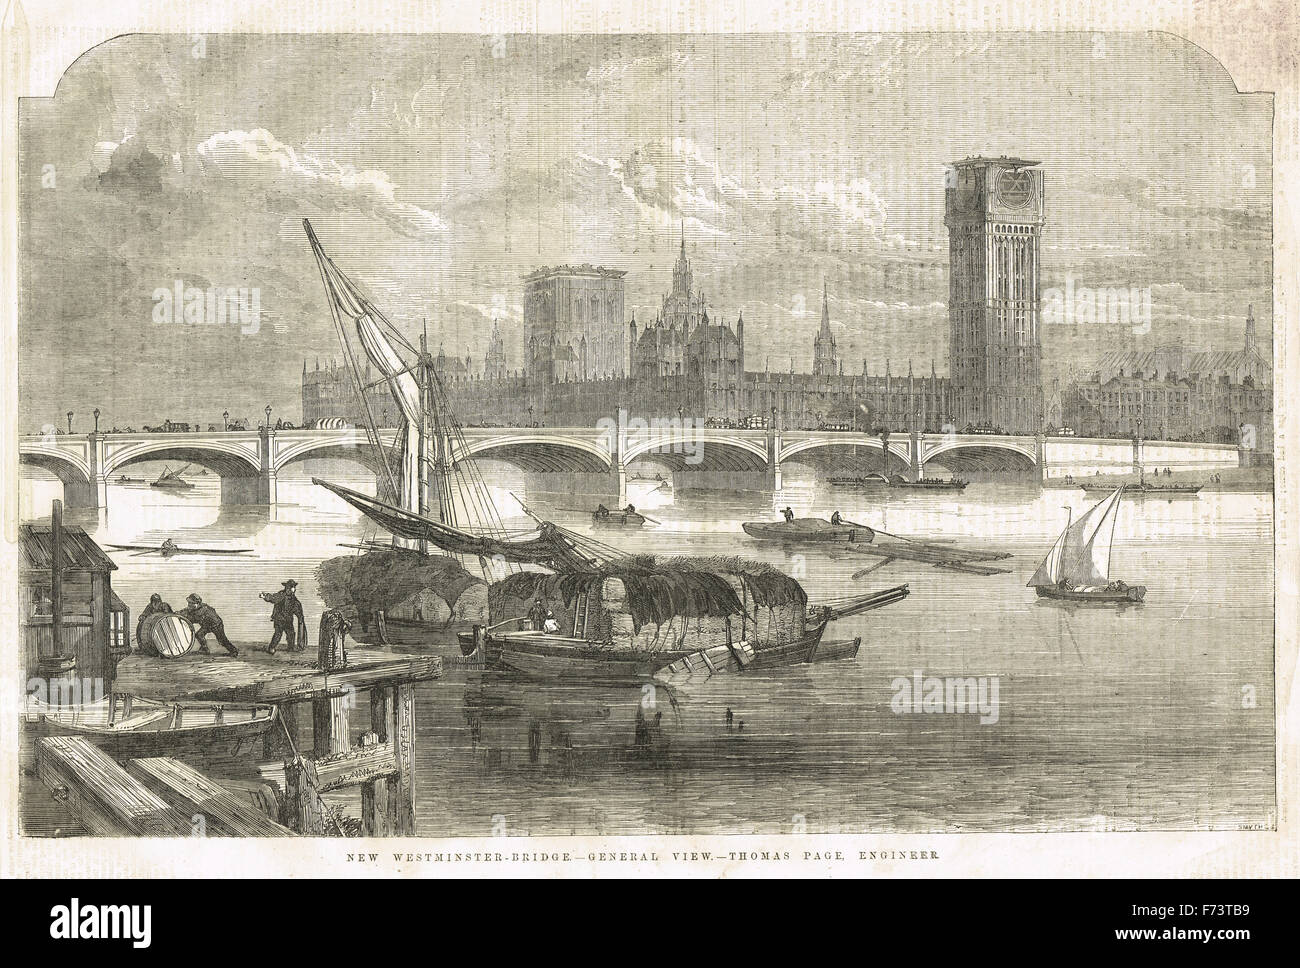 New Westminster Bridge & Palace showing Big Ben clock tower in construction 1855 Stock Photo